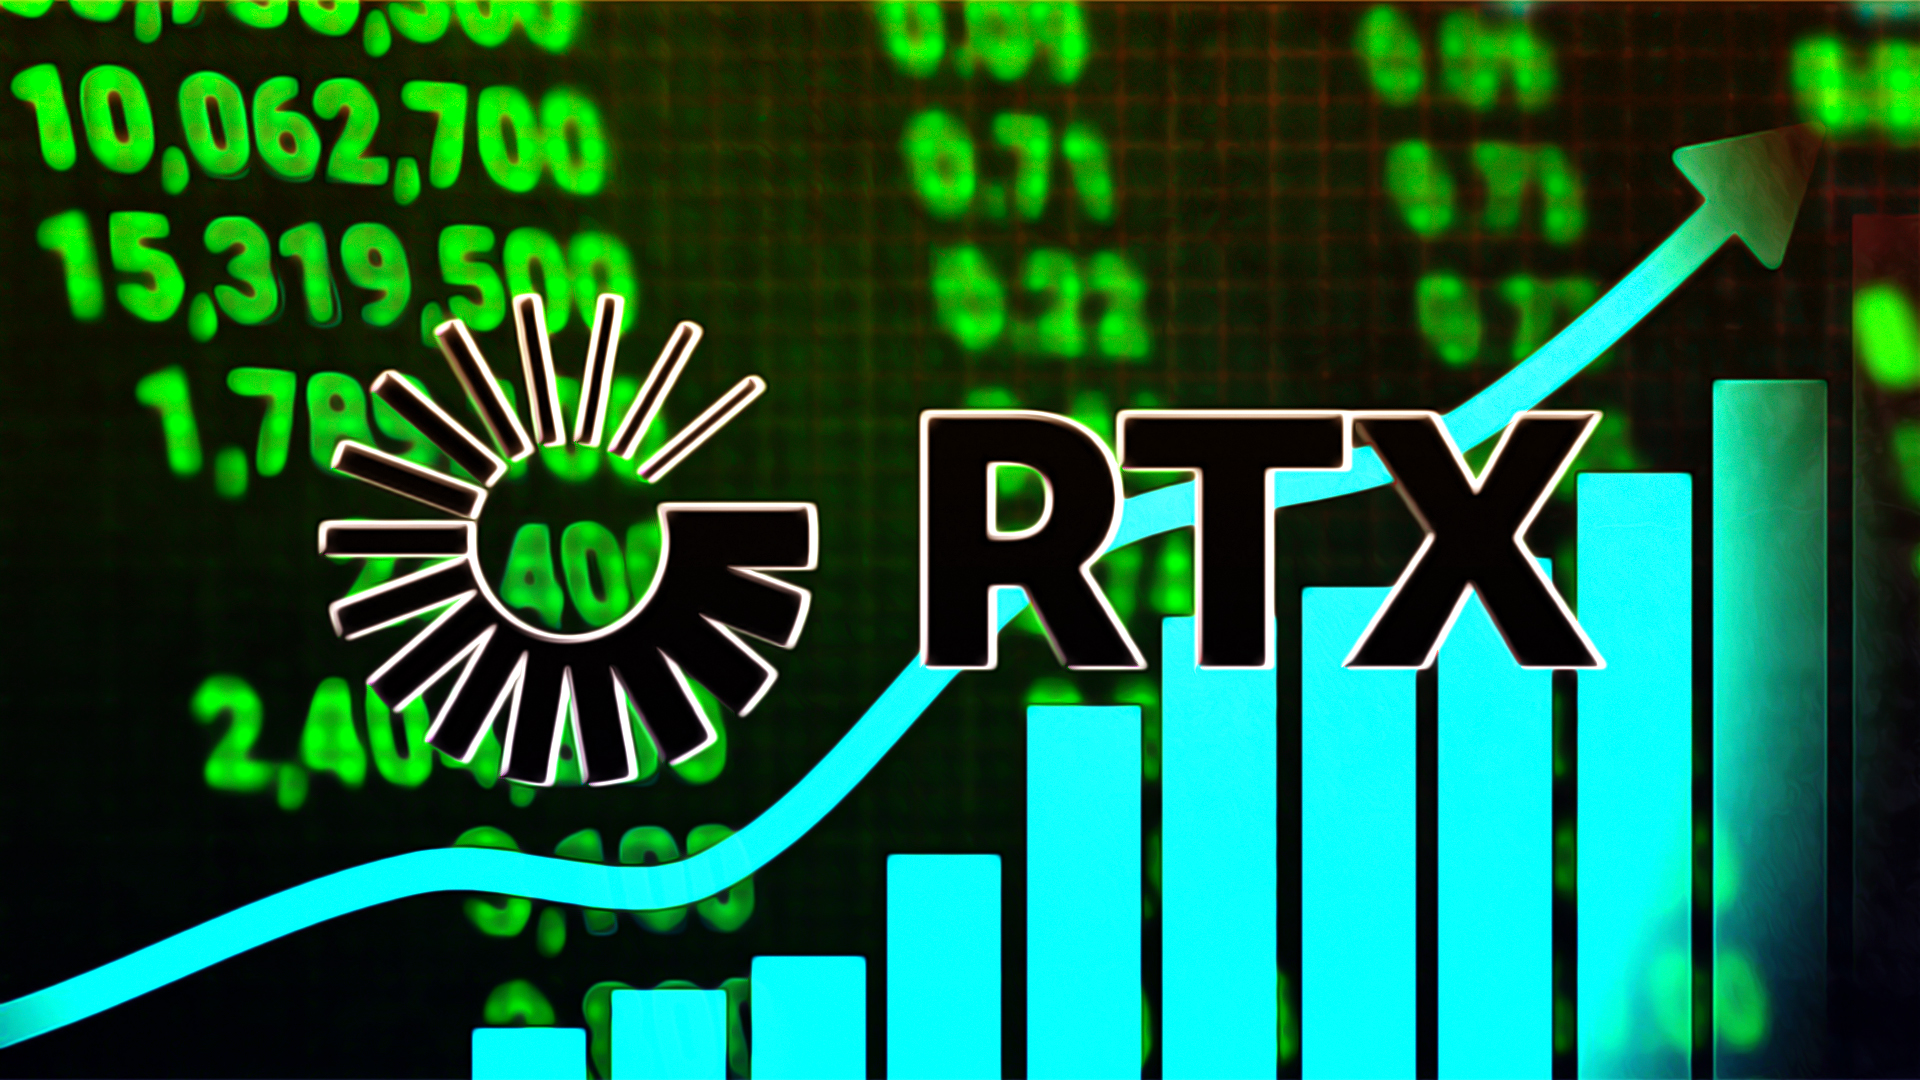 RTX Stock Forecast: Will (NYSE: RTX) Earnings Help Price To Rise?